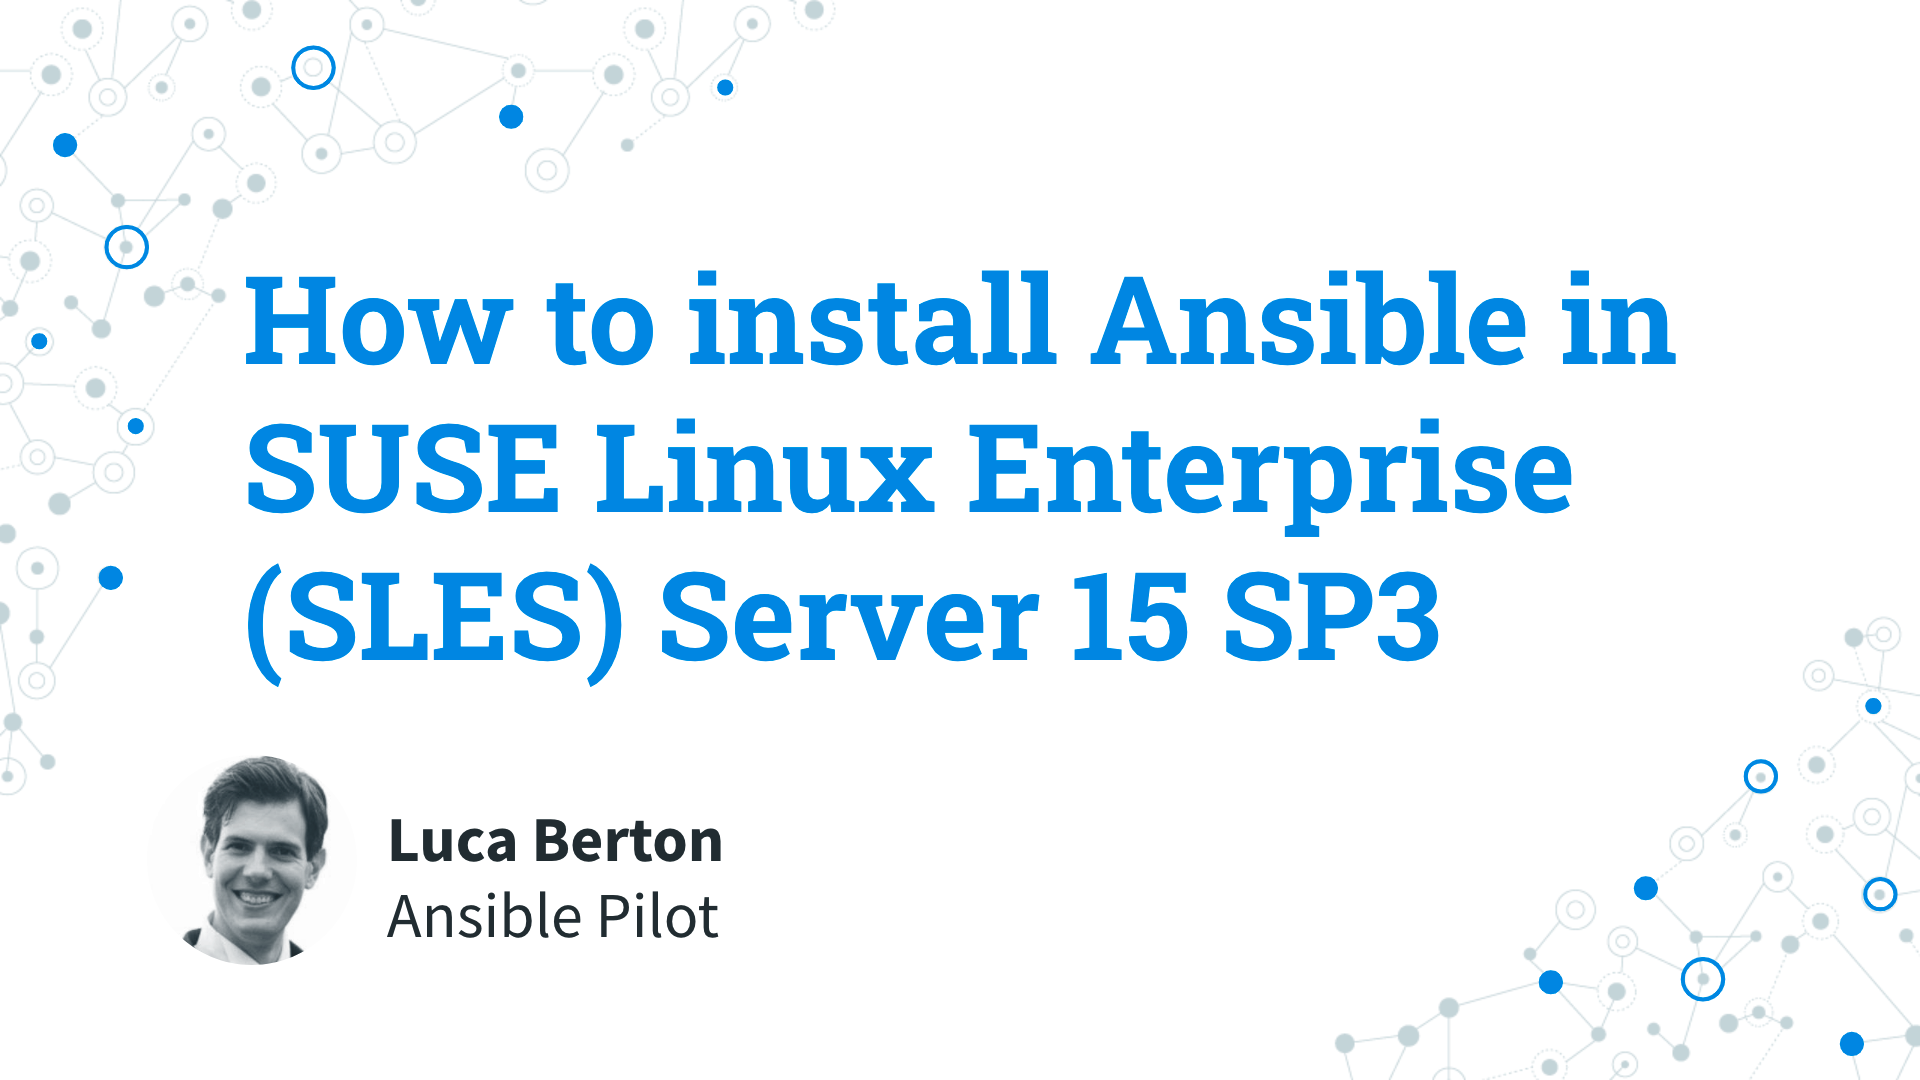 How to install Ansible in SUSE Linux Enterprise Server (SLES) 15 SP3 - Ansible install